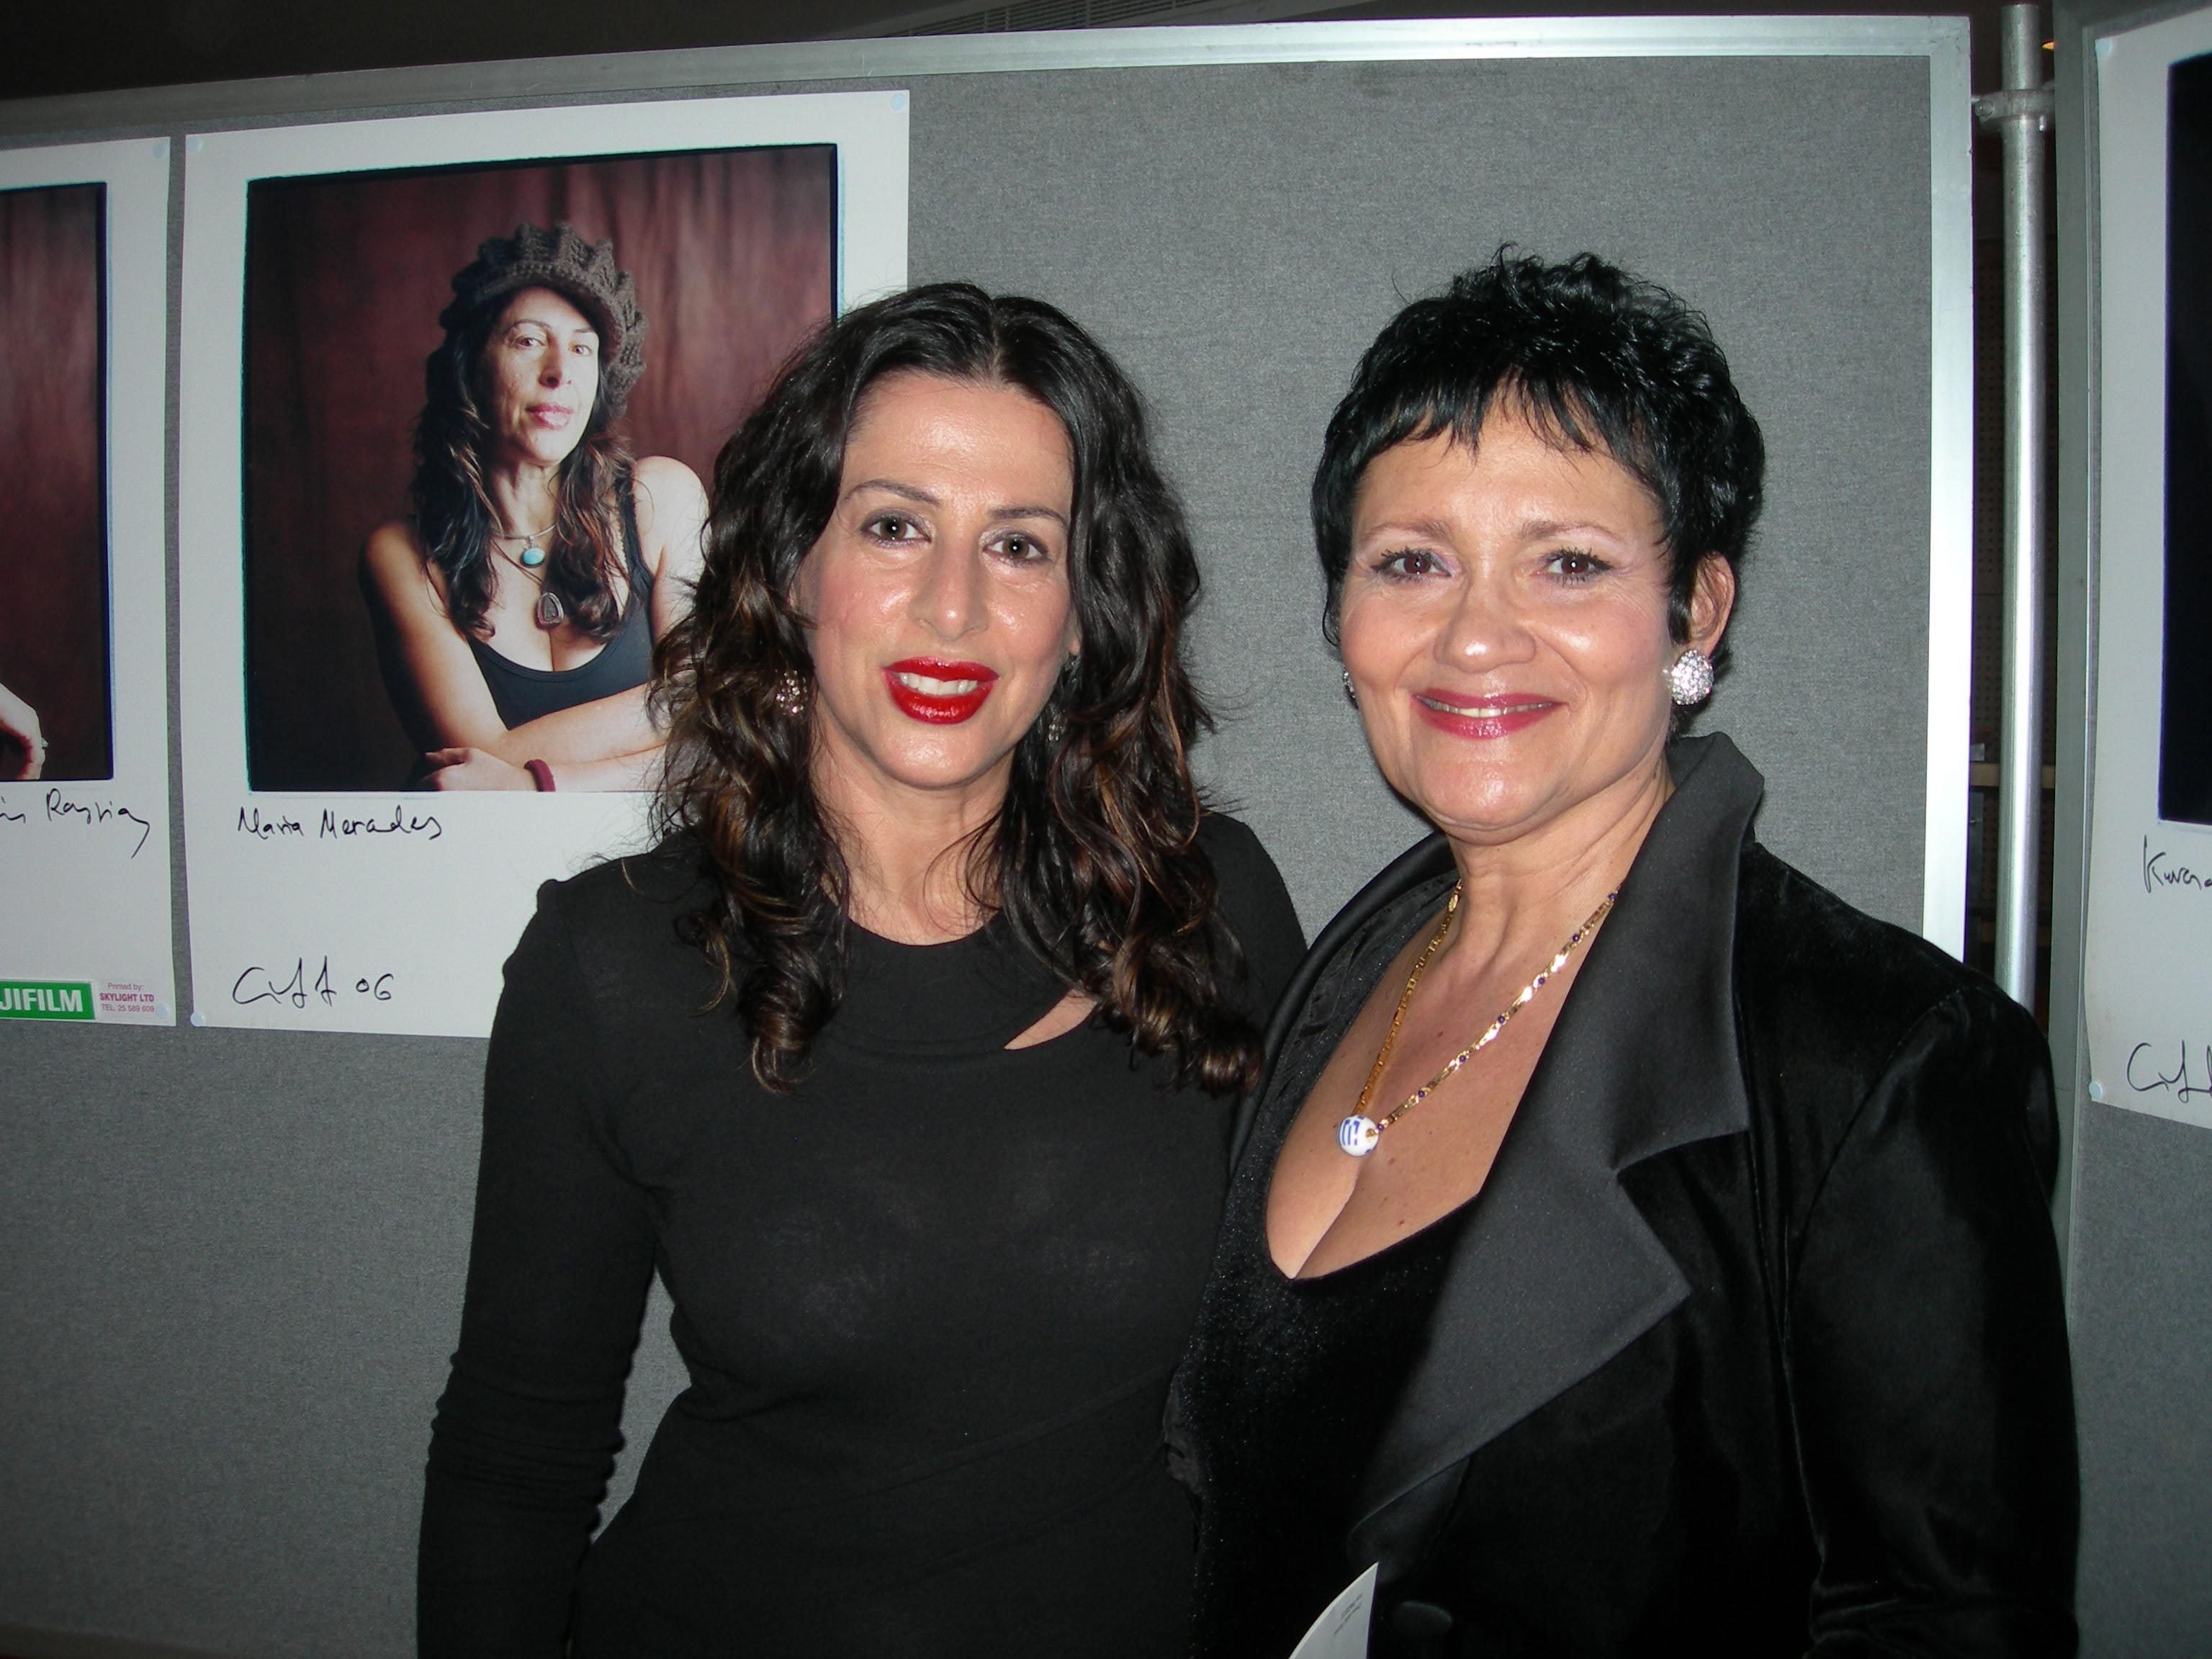 Award-winning Director Jenna Constantine with Best Actress Nominee Maria Mercedes at the Cyprus International Film Festival 2006